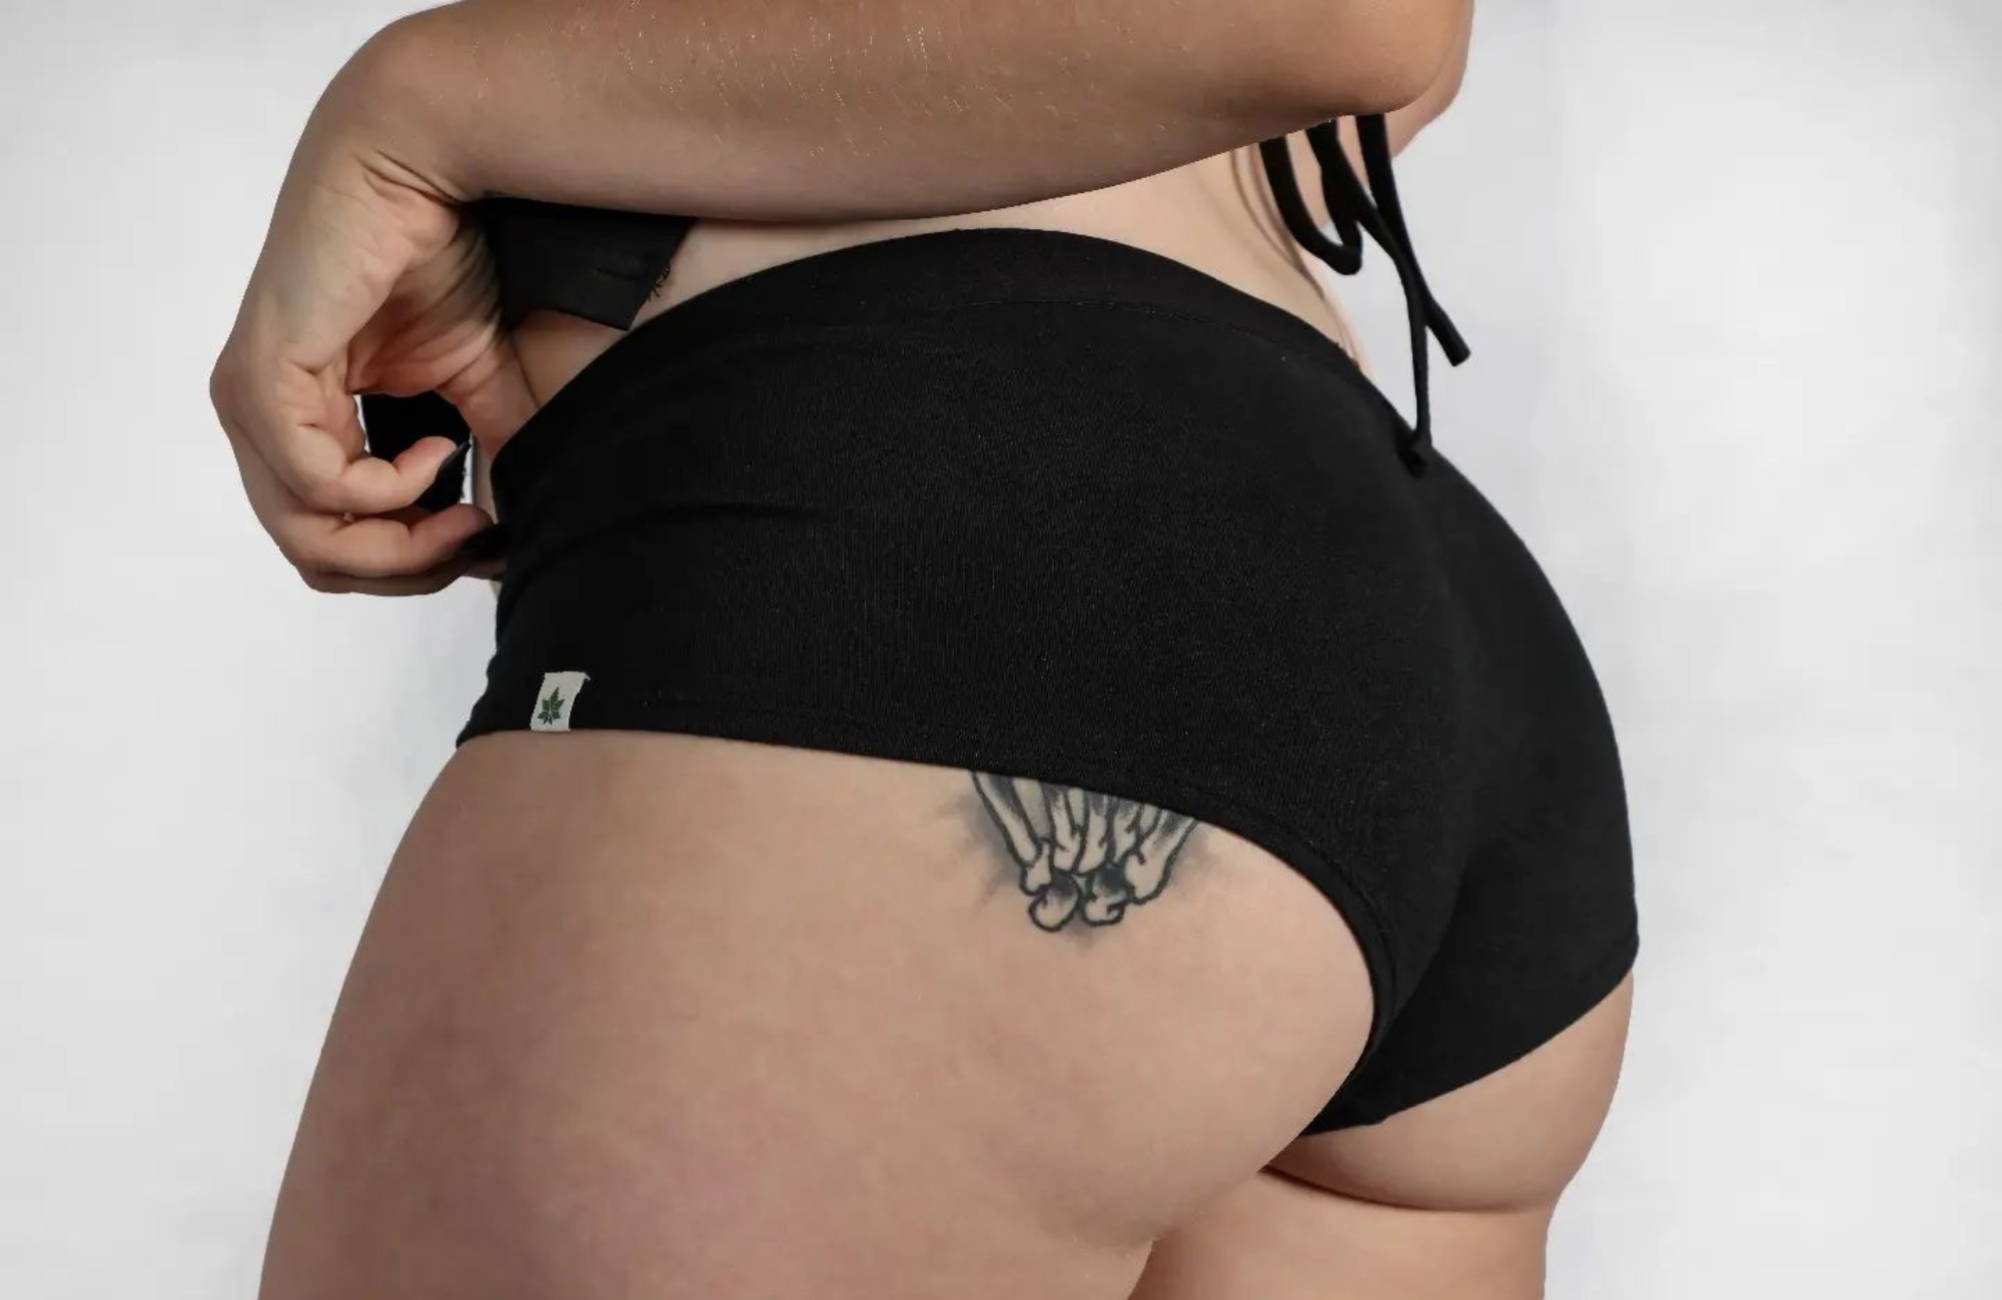 Finding the best high waisted knickers & underwear